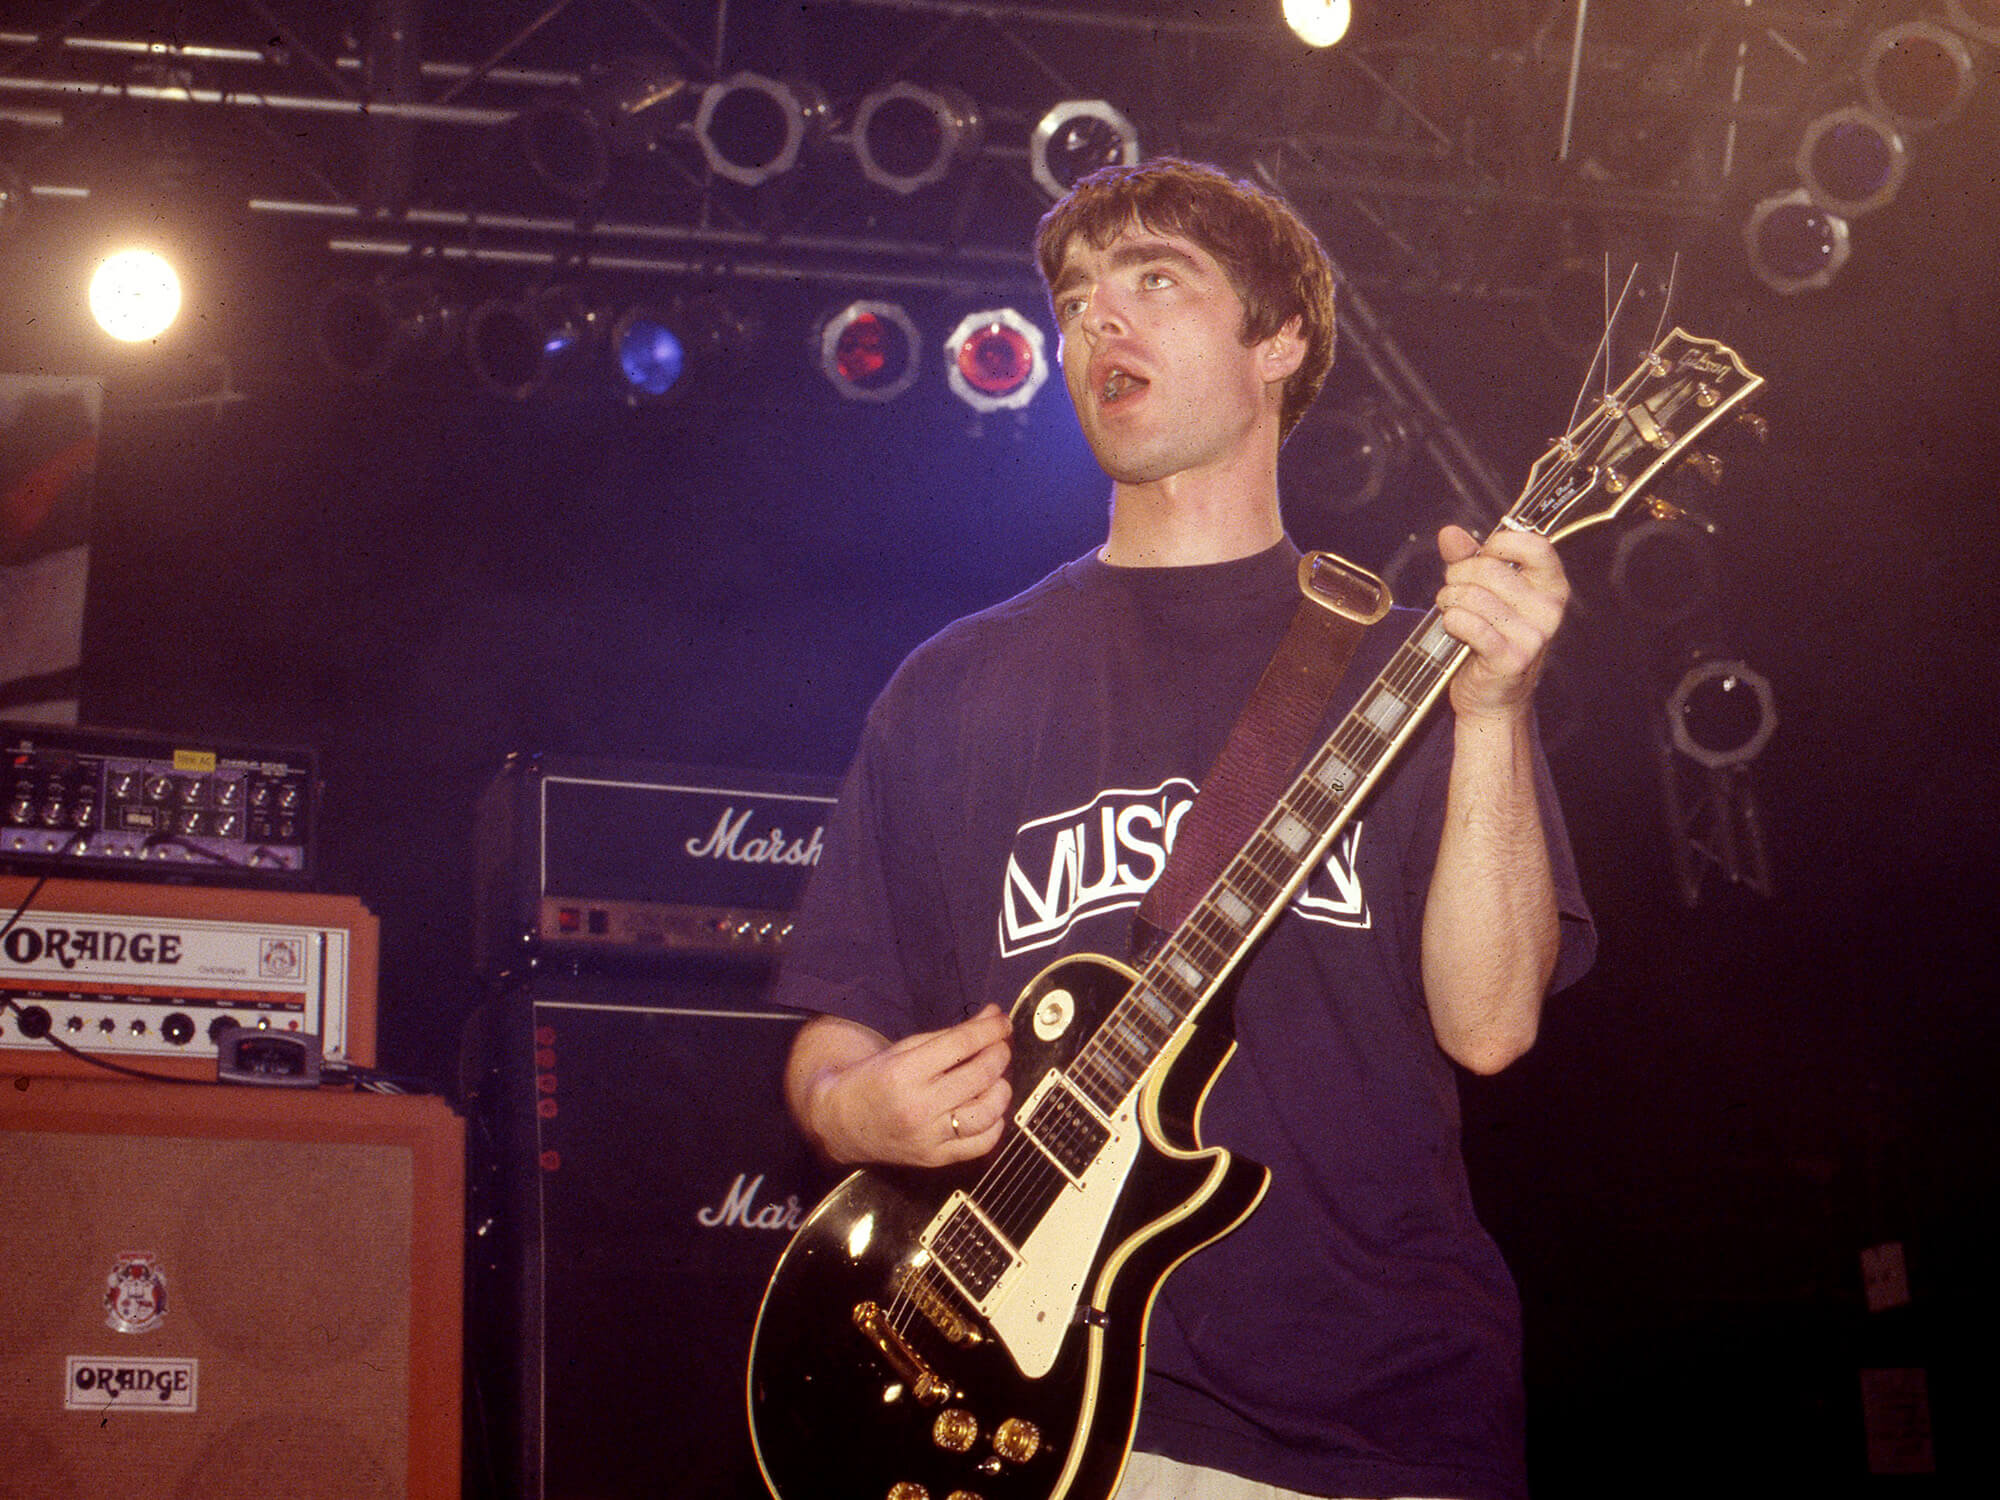 Noel Gallagher photographed on stage in 1994 with his guitar